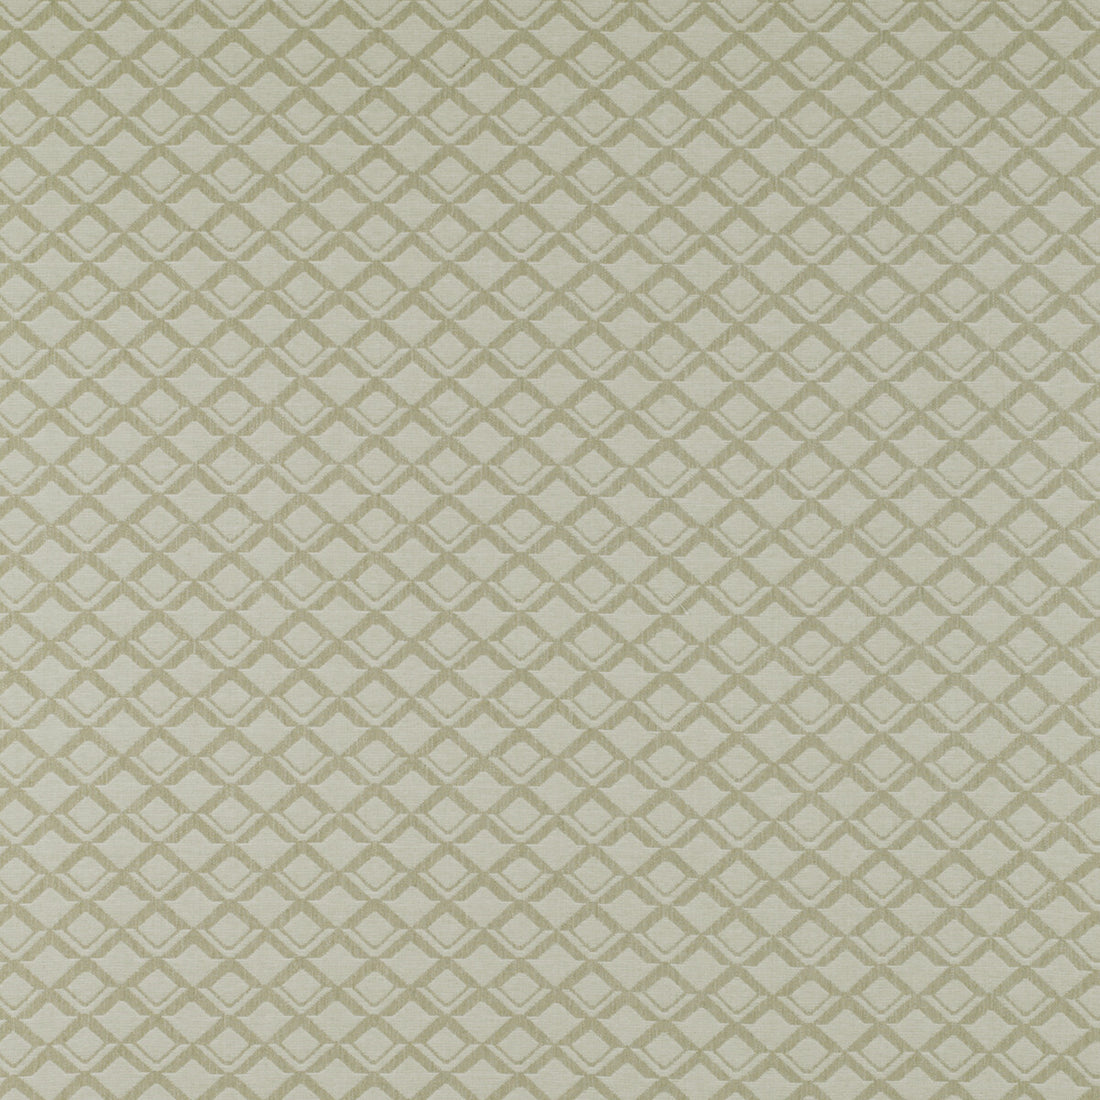 Lodi fabric in blanco color - pattern GDT5324.003.0 - by Gaston y Daniela in the Tierras collection